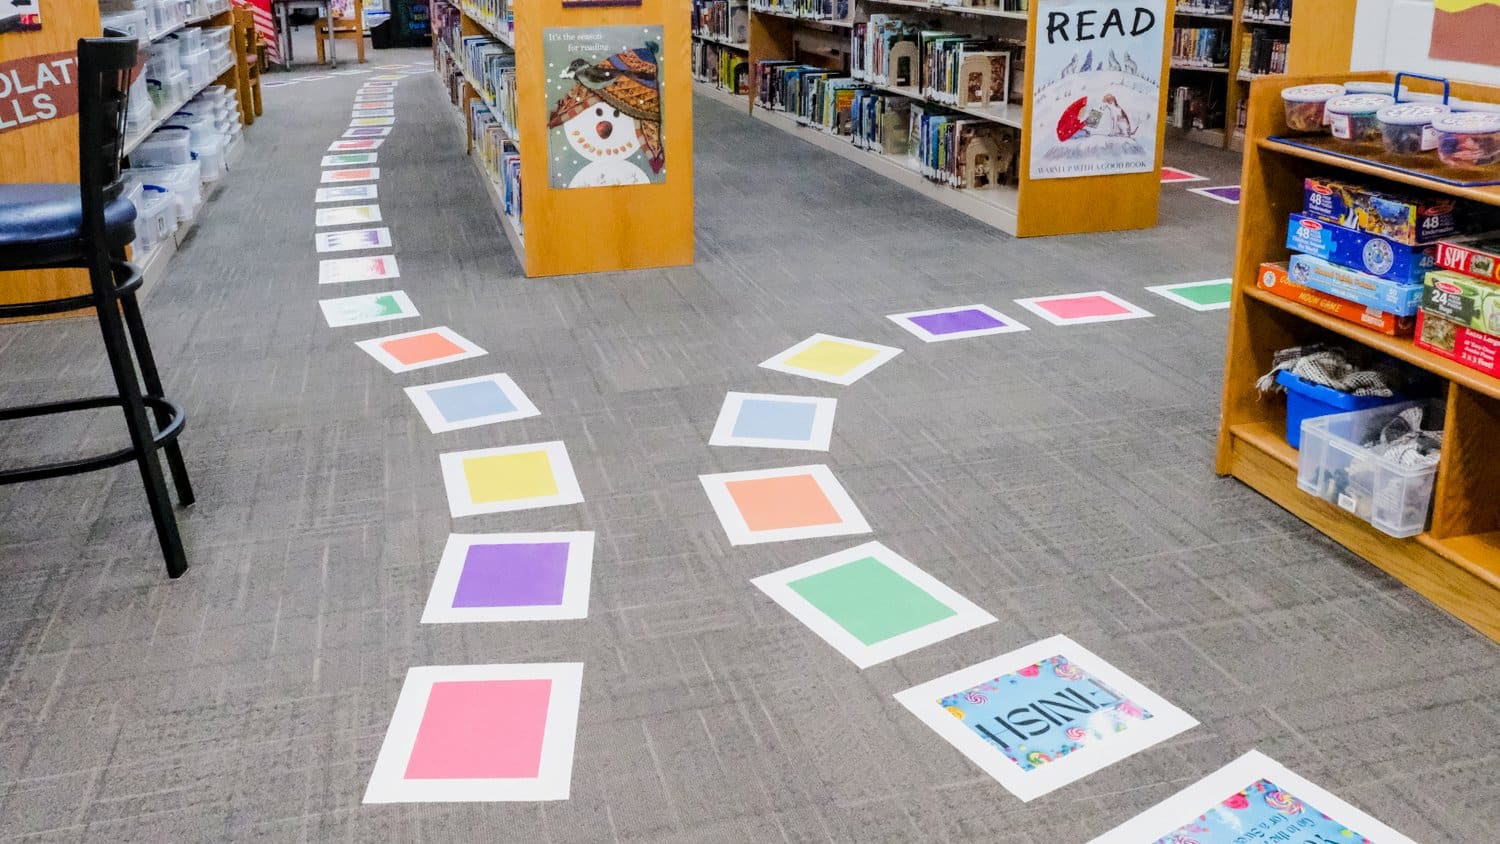 Life-sized Candyland game setup on the library floor for Library Lovers Expedition.